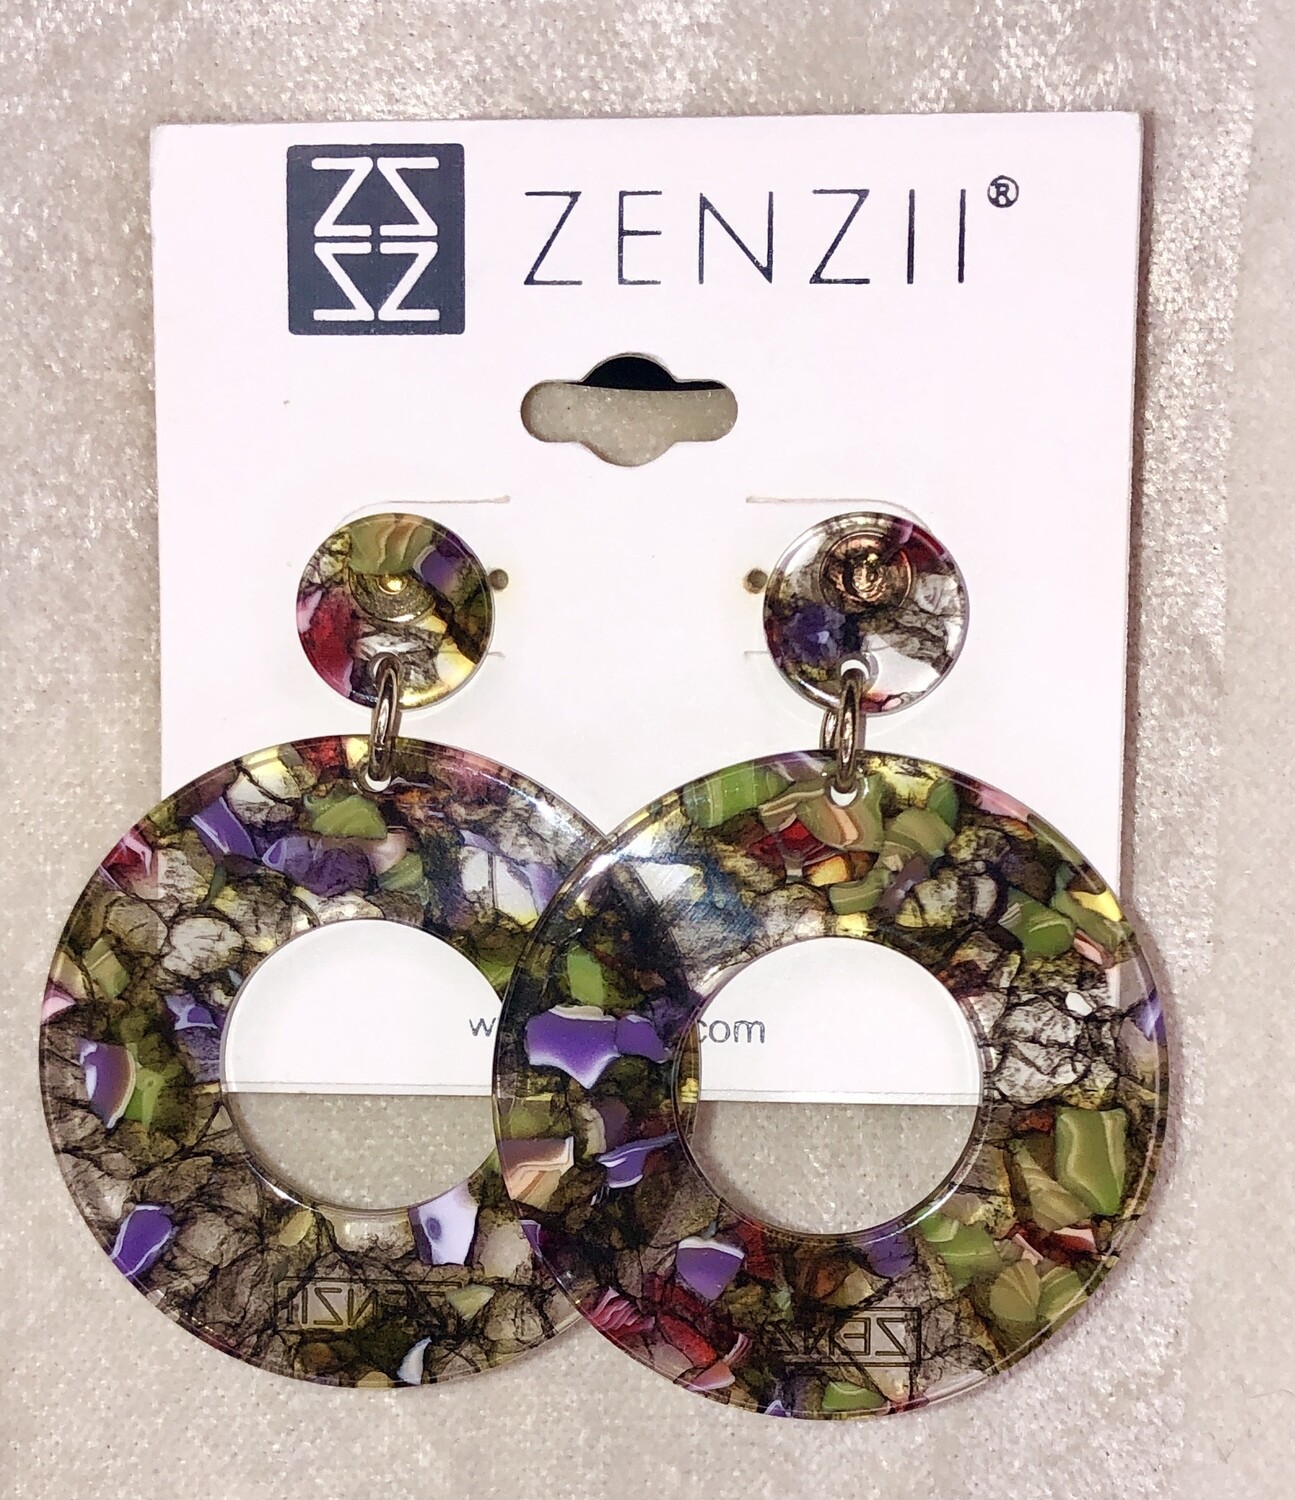 Zenzii Tortoise-shell-look Earrings with Circular Cut-out Silhouette